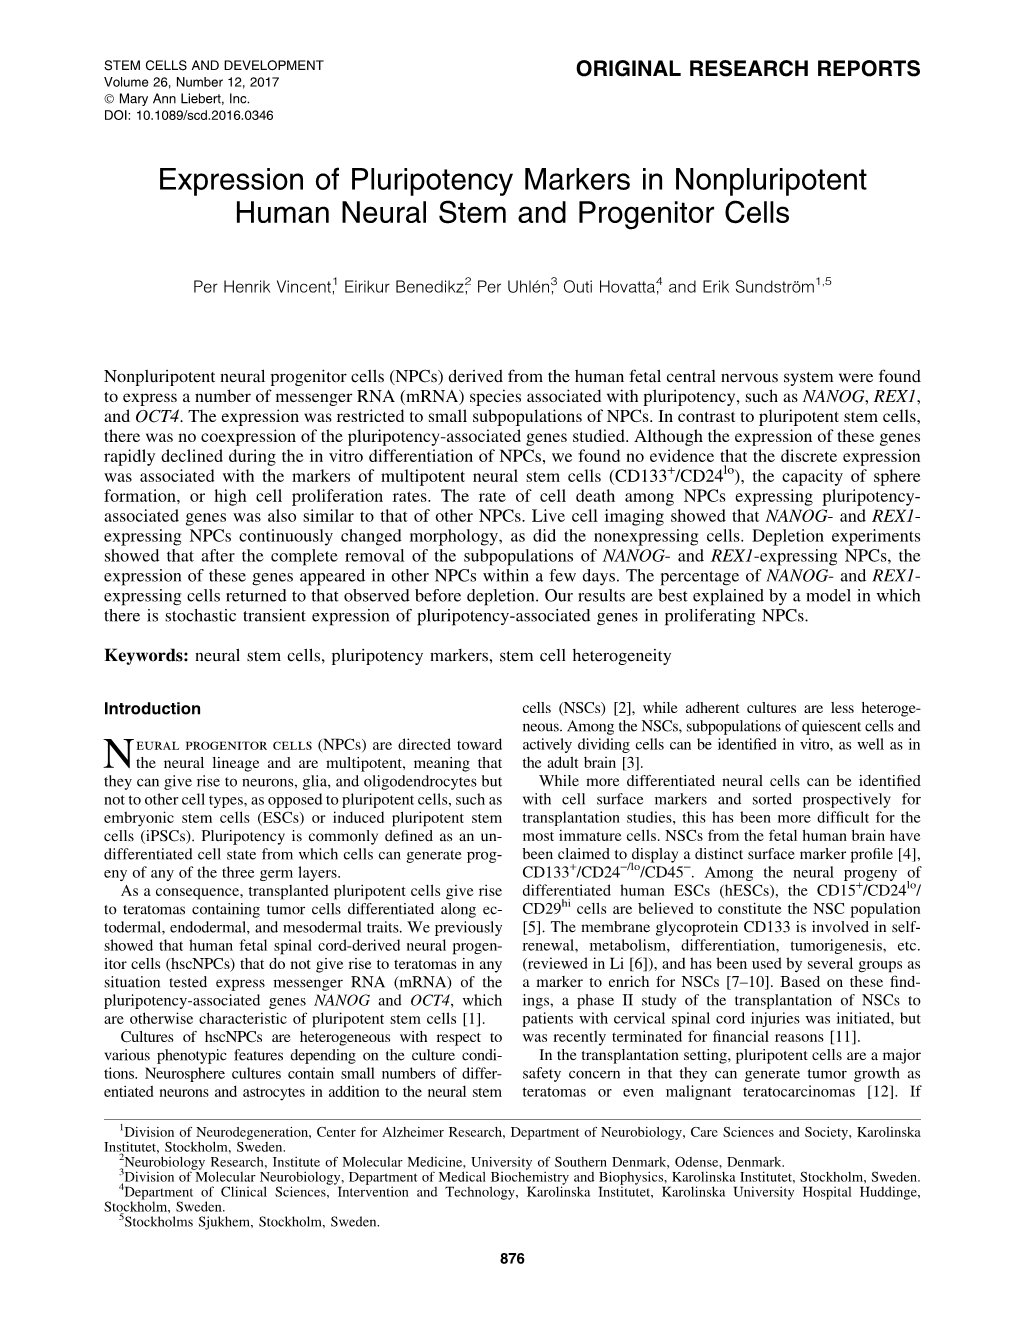 Expression of Pluripotency Markers in Nonpluripotent Human Neural Stem and Progenitor Cells